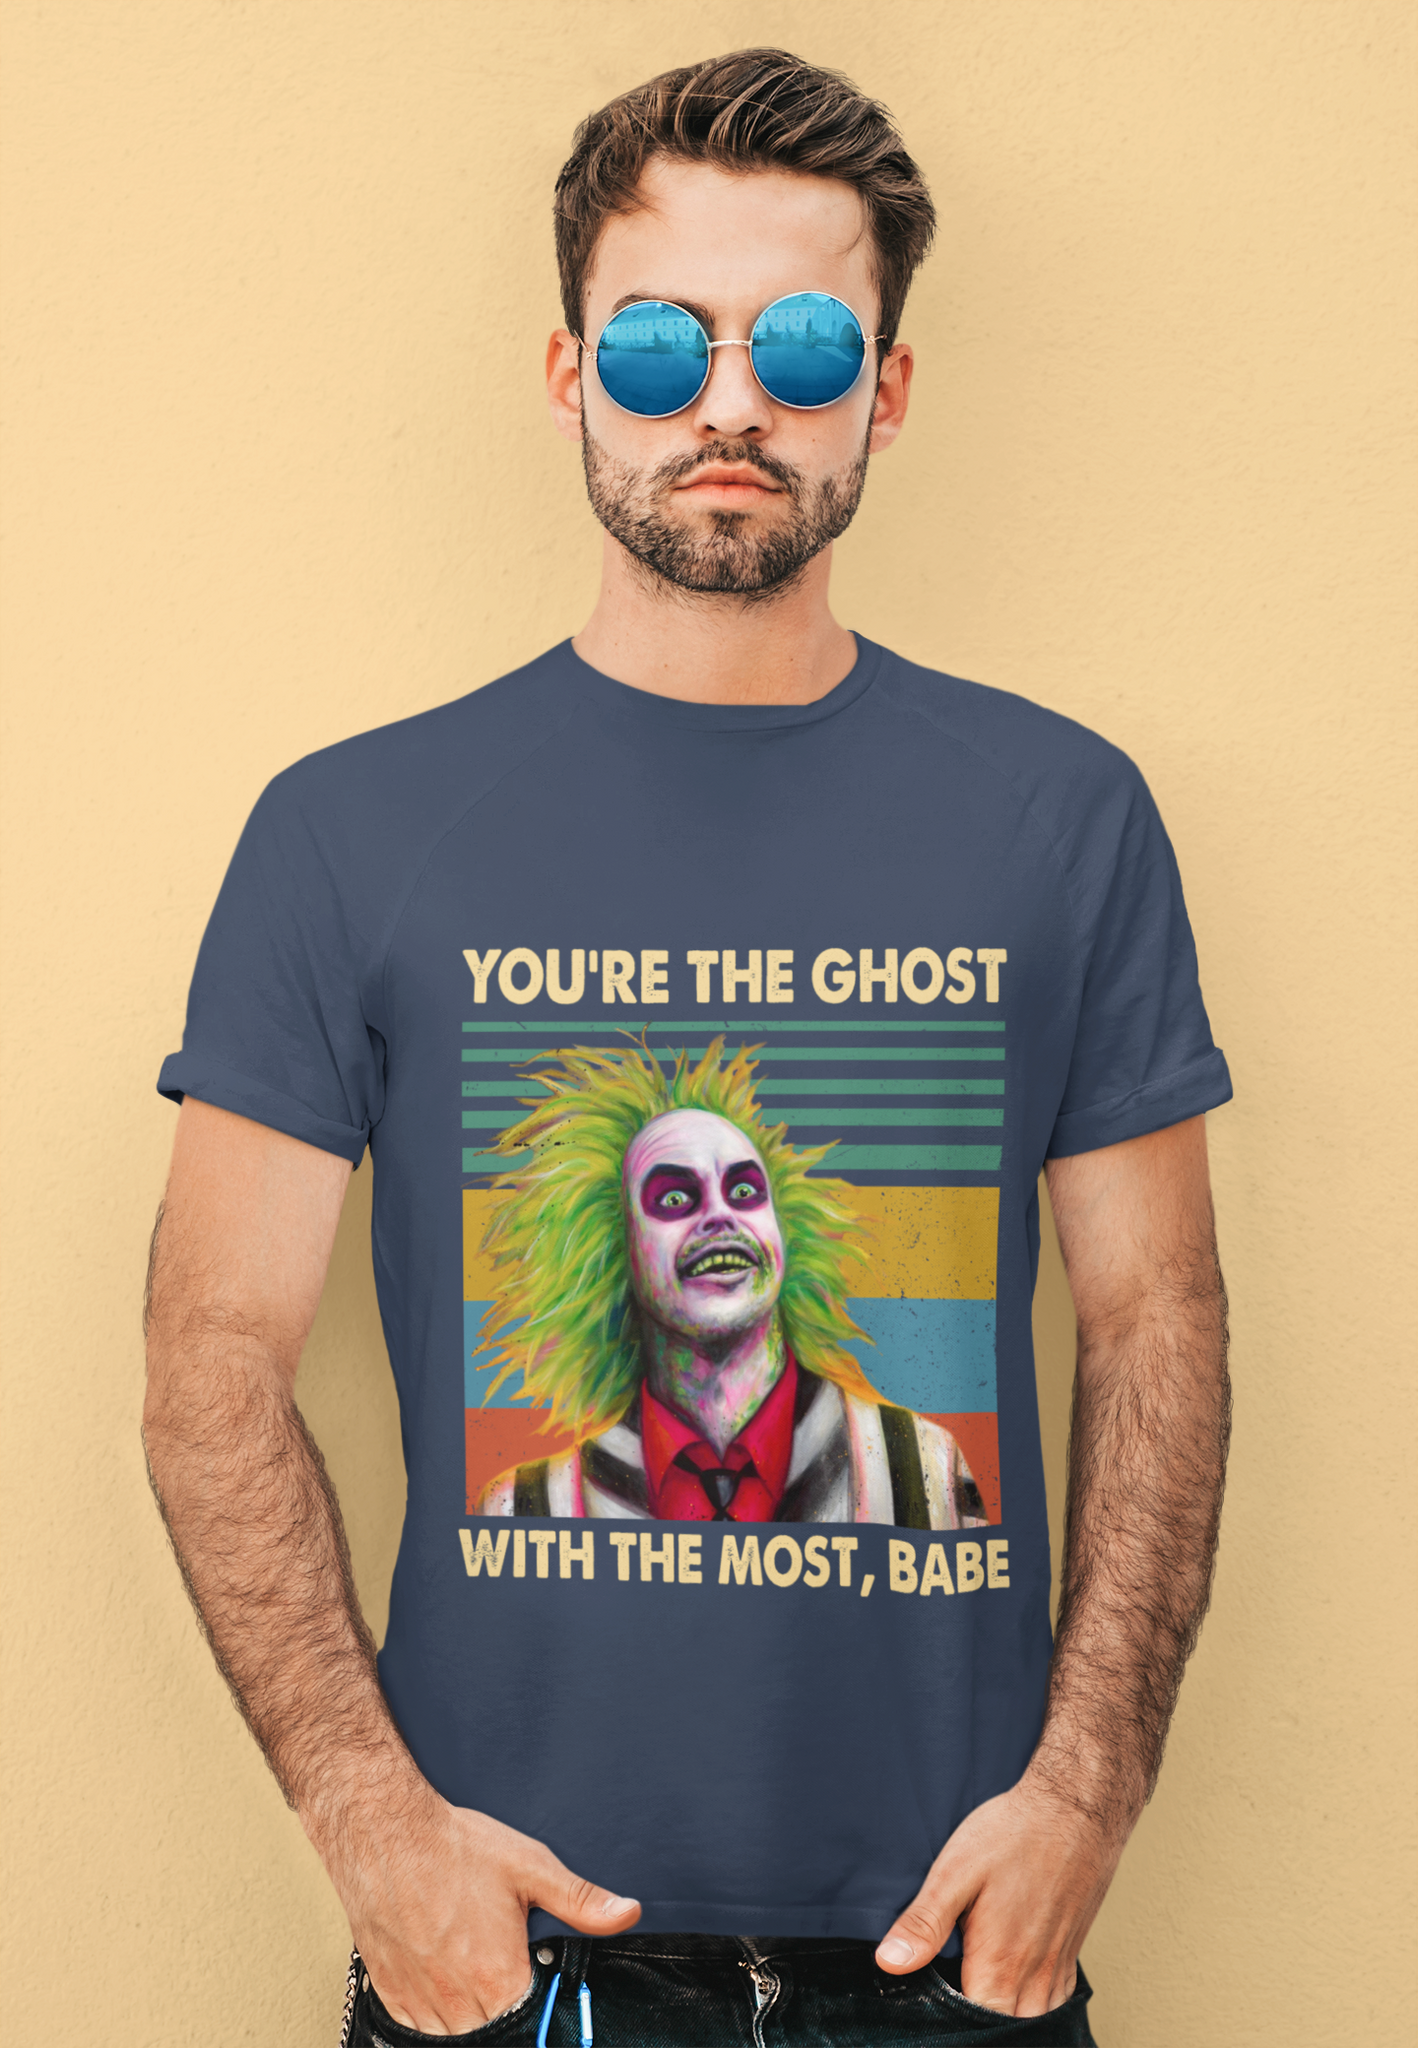 Beetlejuice Vintage T Shirt, Youre The Ghost With The Most Babe Shirt, Halloween Gifts